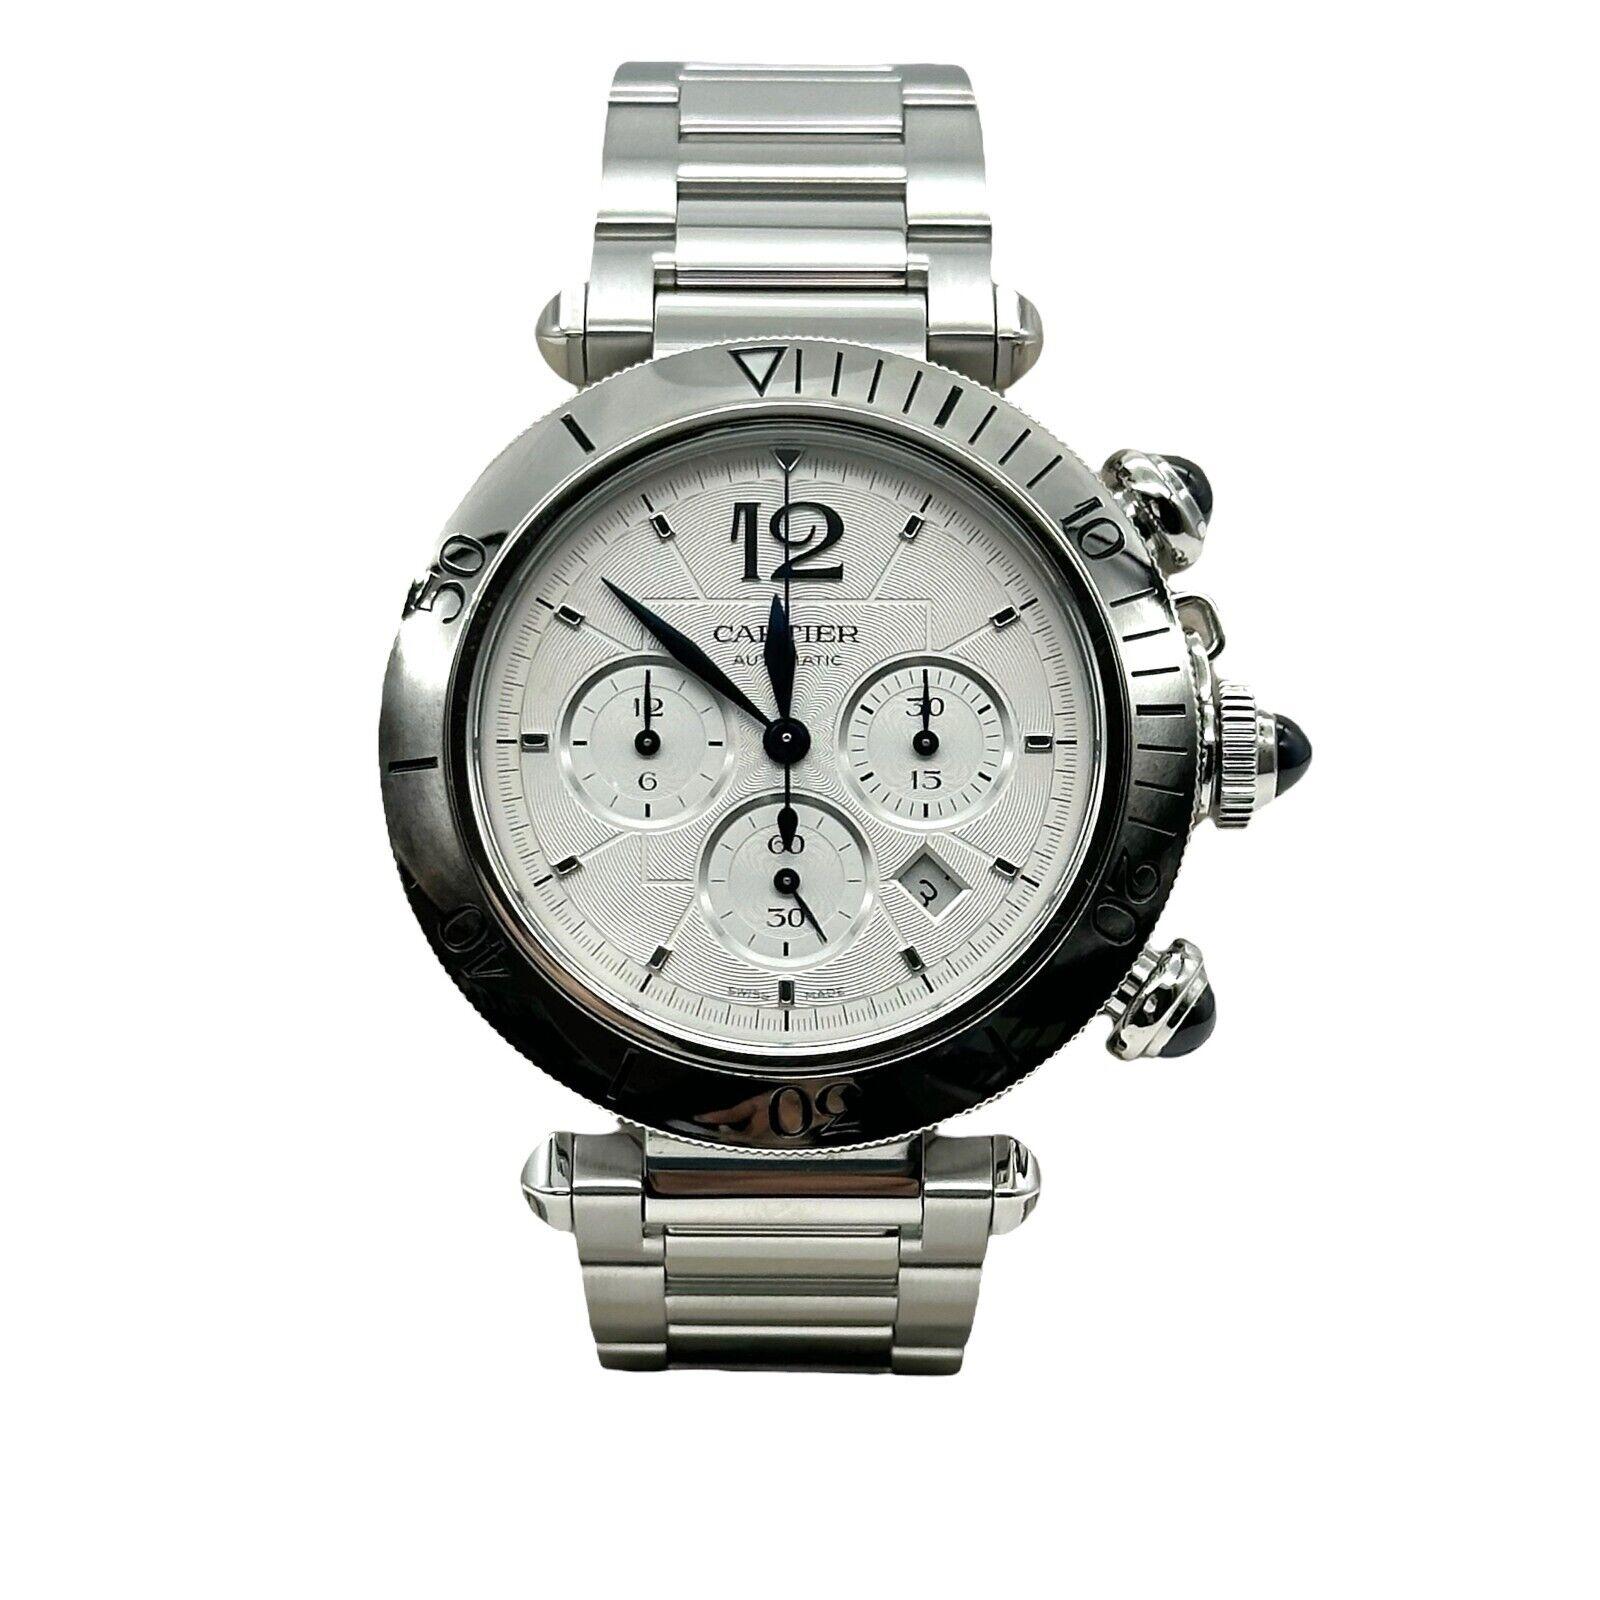 Cartier Pasha WSPA0018 Chronograph Ref 4363 Chronograph Stainless Box Paper For Sale 1